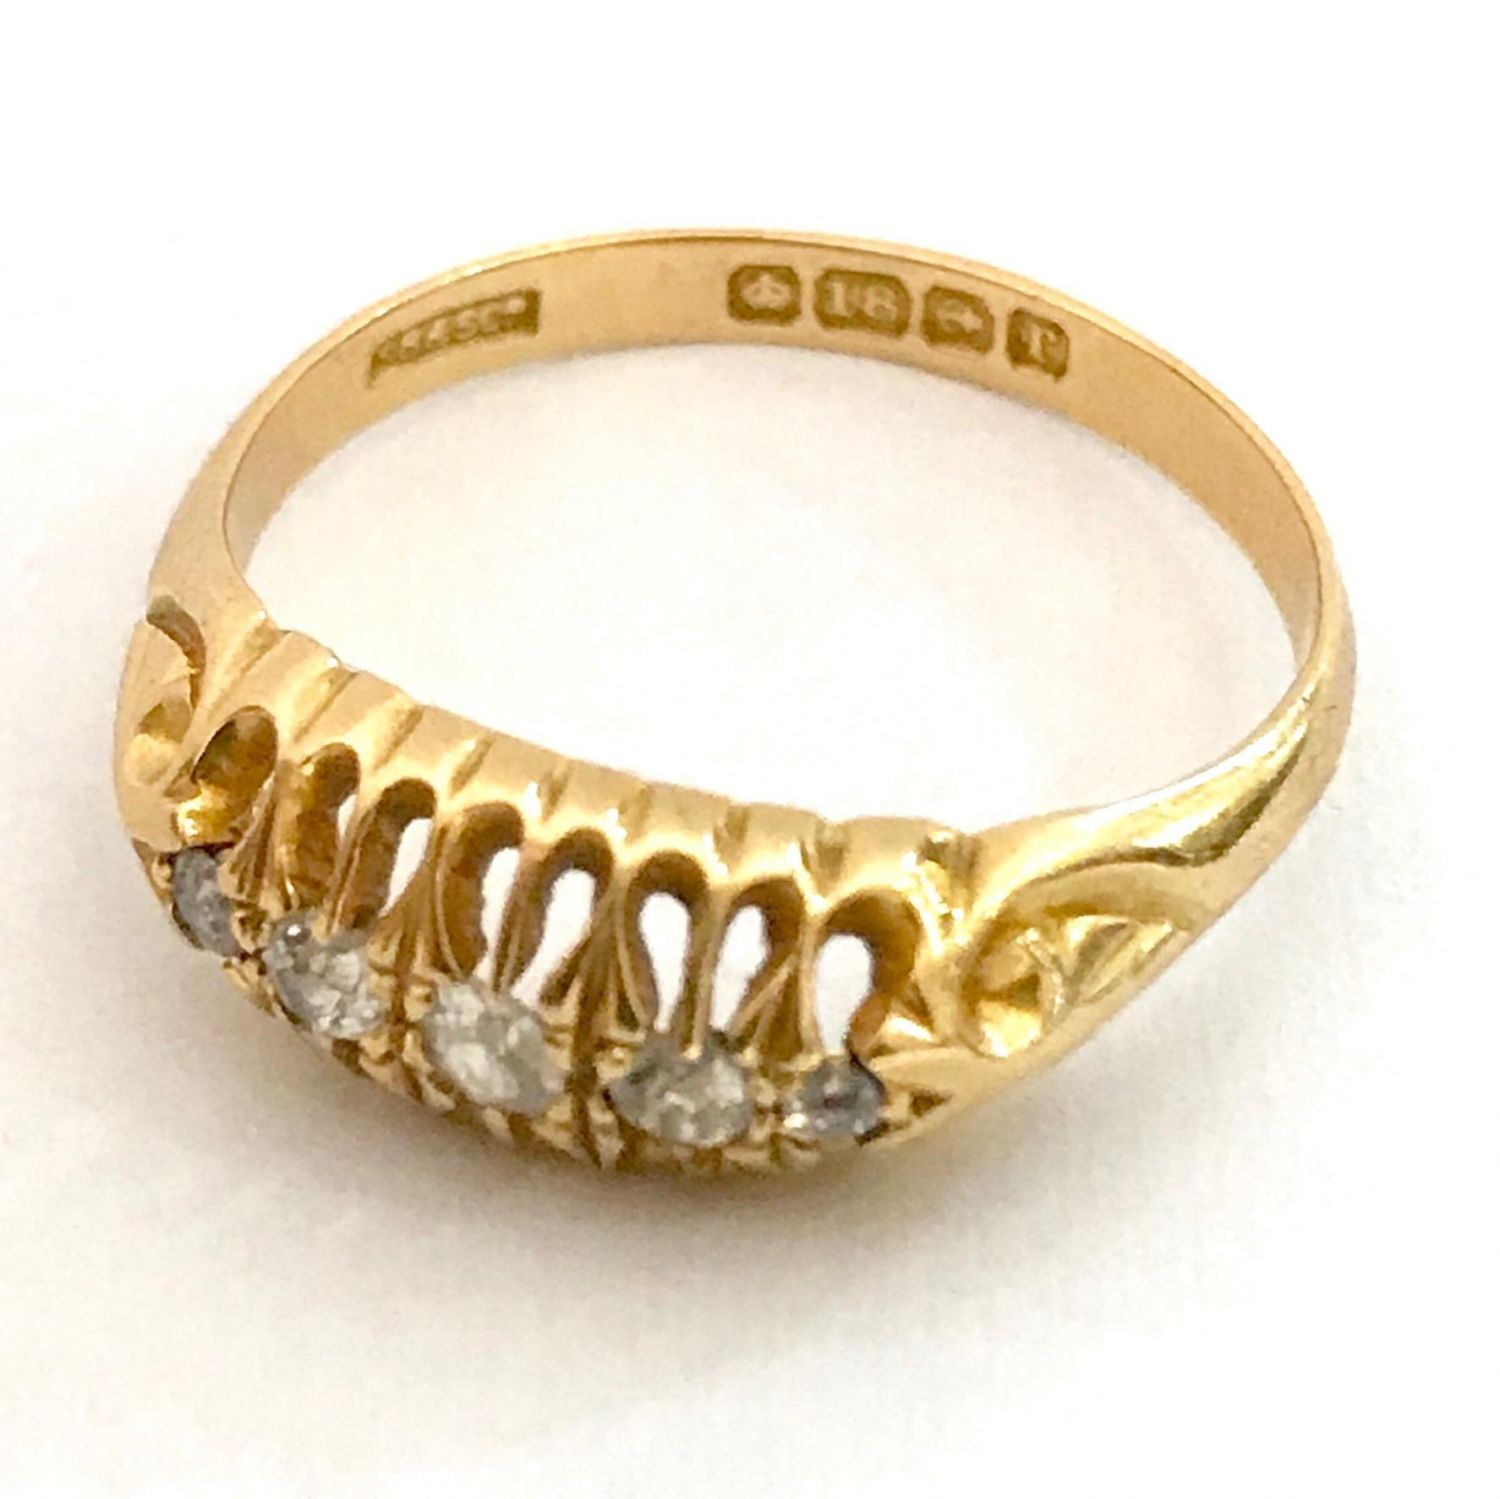 Early 1900s Gold Diamond Ring - Jewellery & Gold - Hemswell Antique Centres